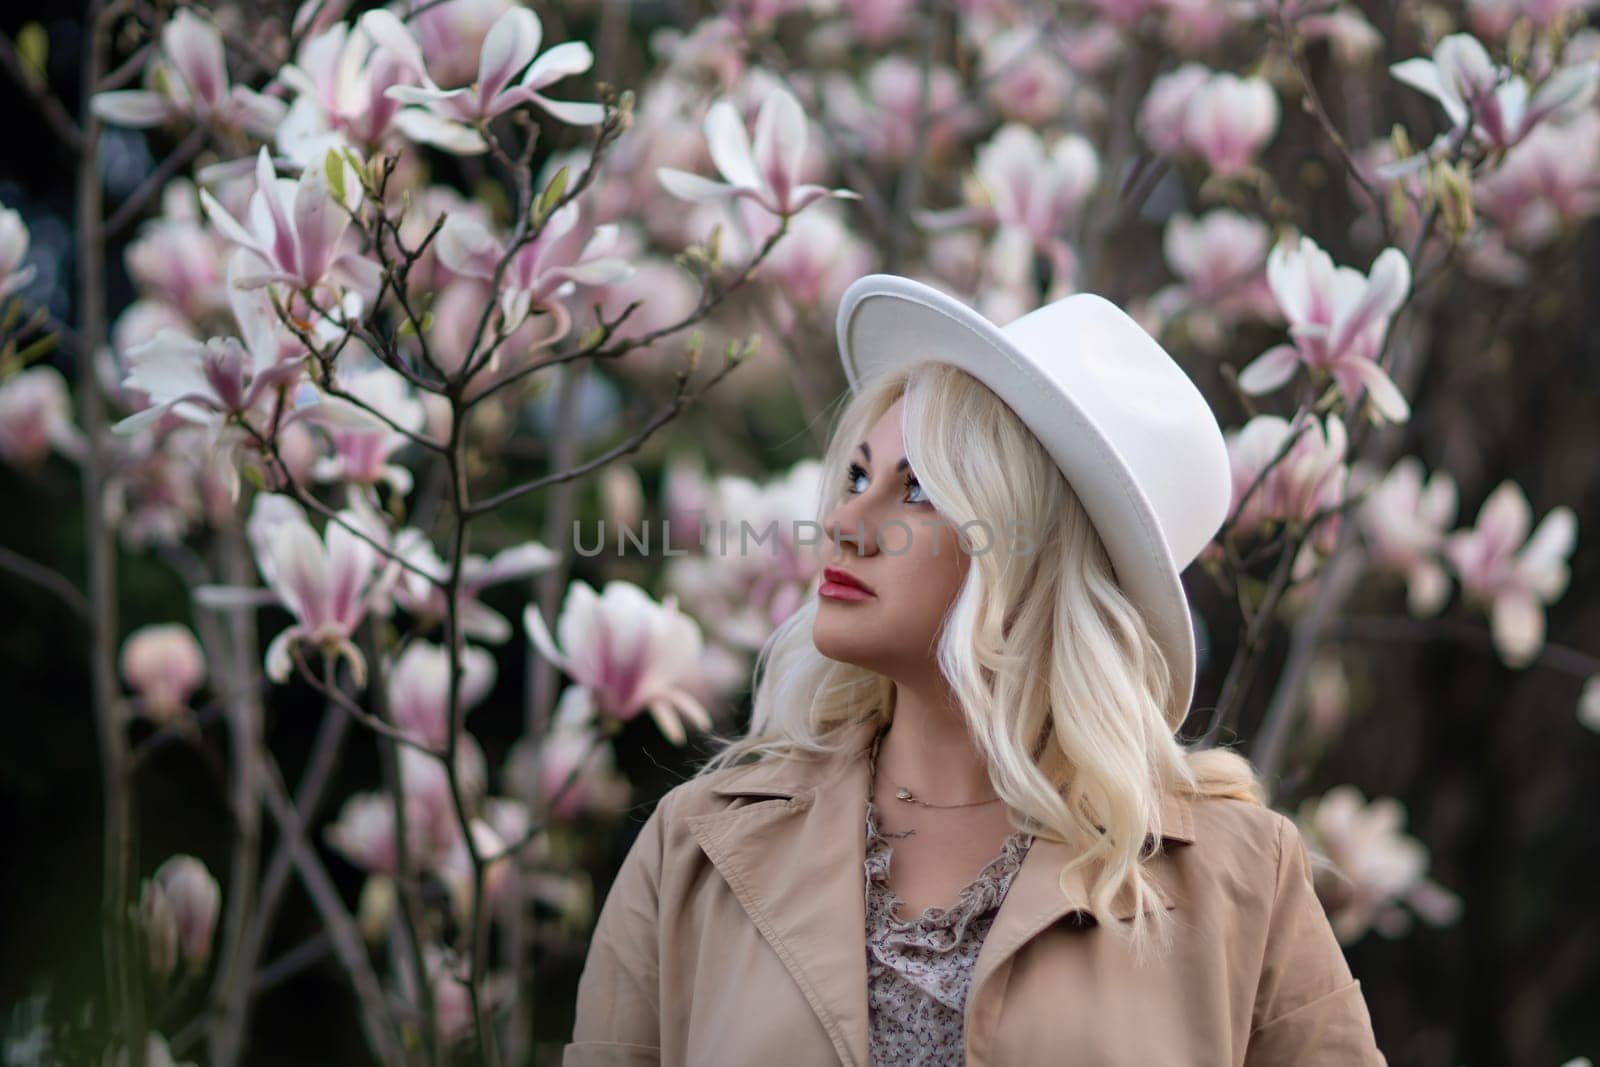 Magnolia flowers woman. A blonde woman wearing a white hat stands in front of a tree with pink flowers